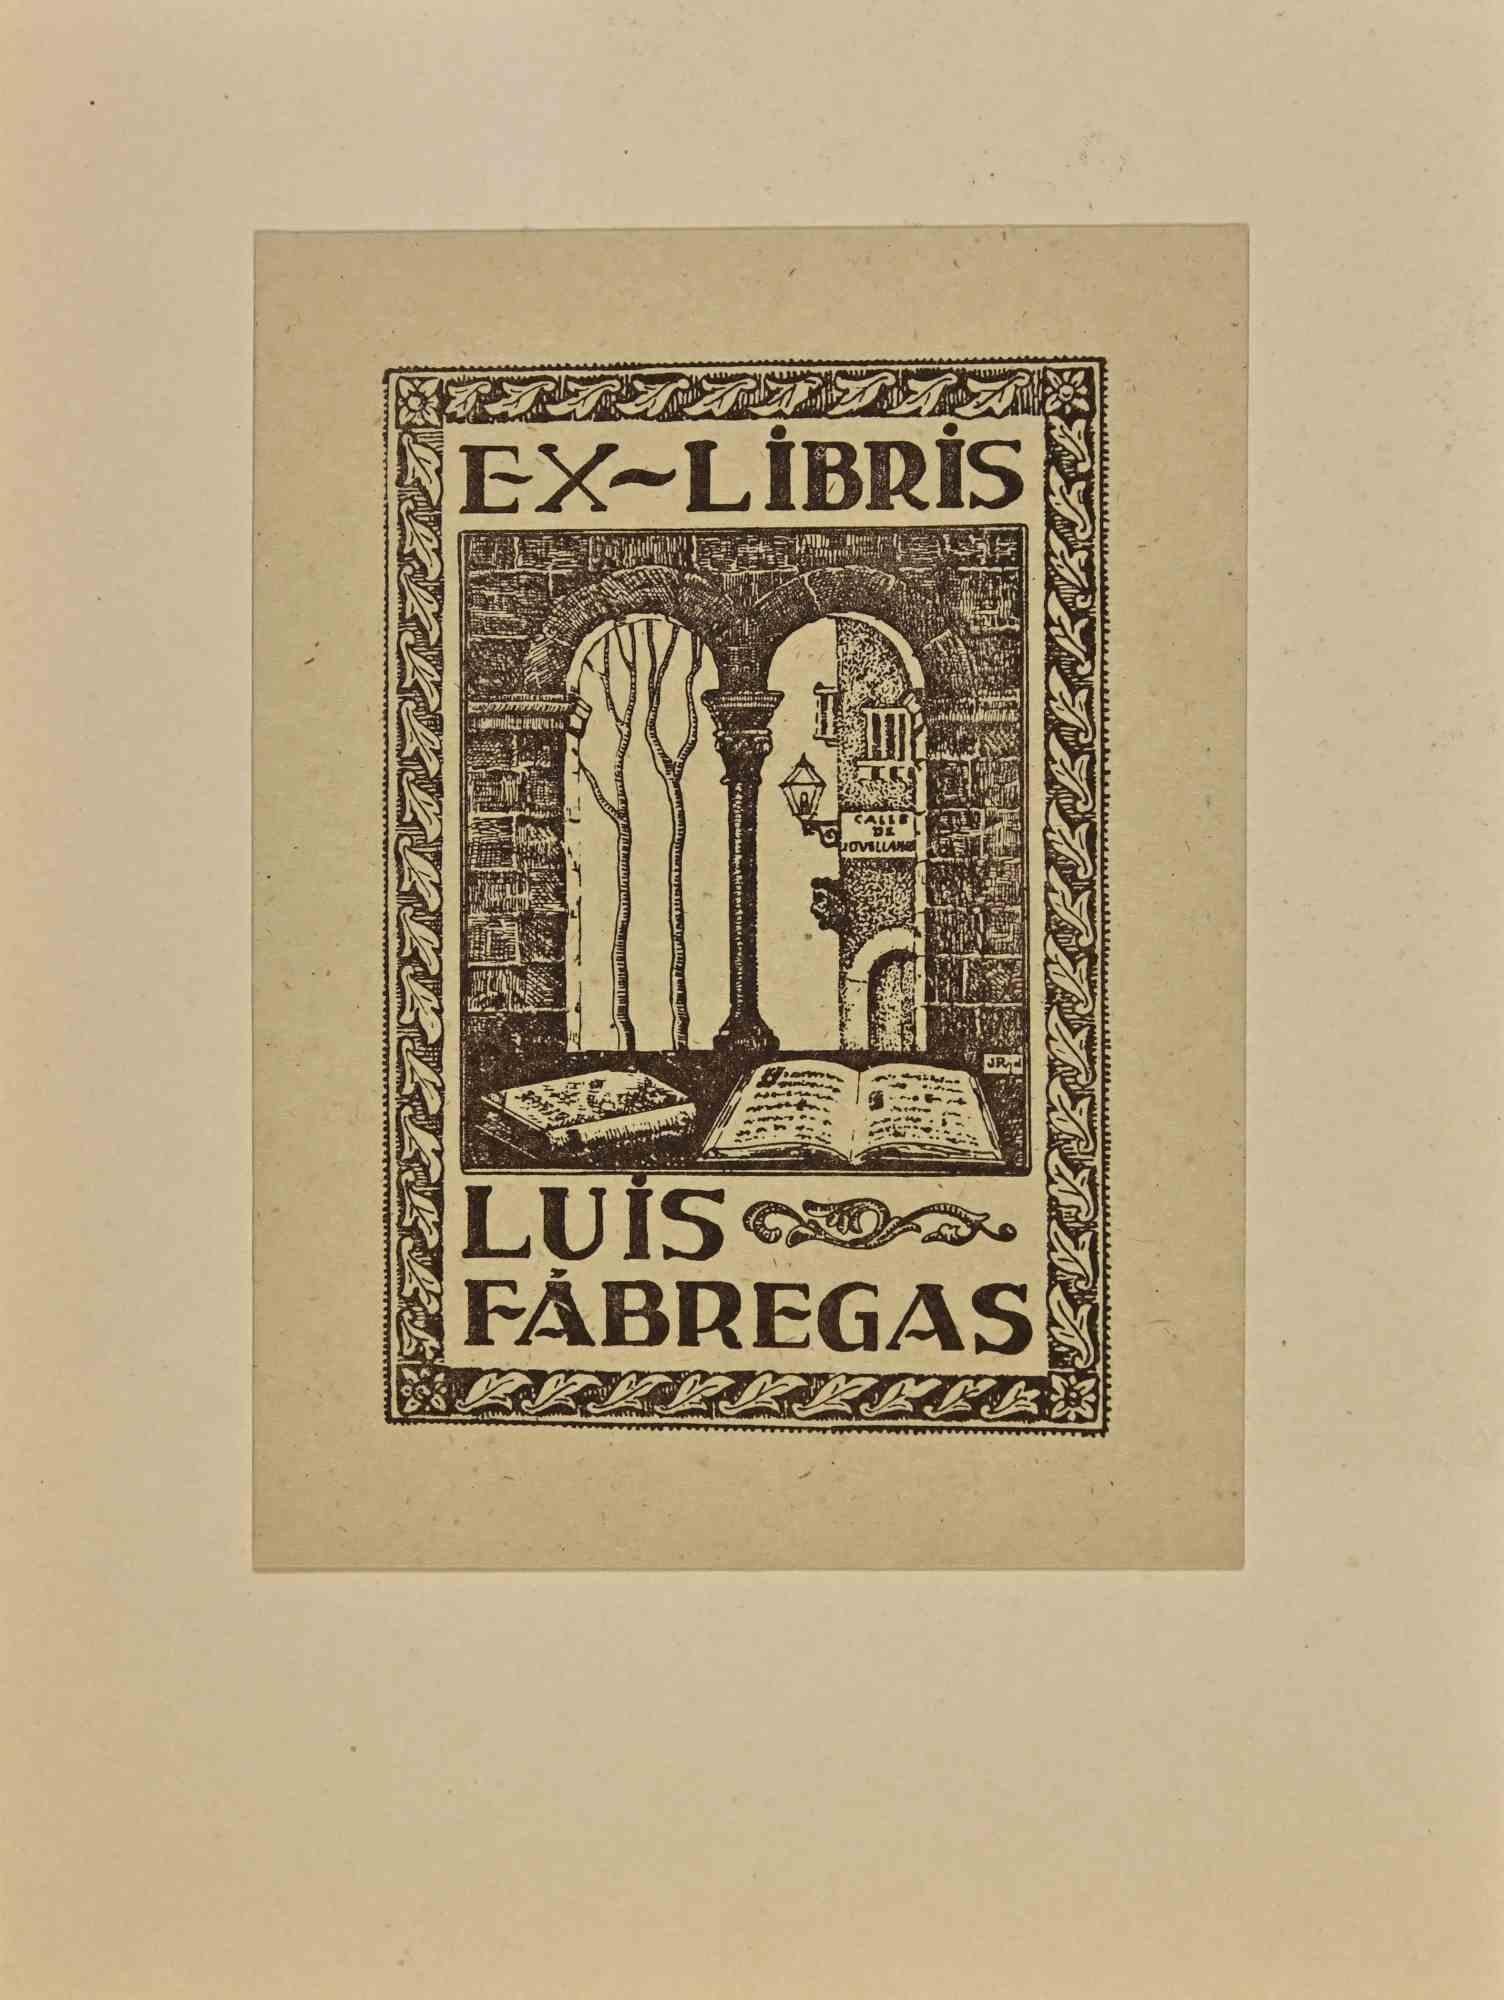 Ex-Libris Luis Fabregas is an Artwork realized in Mid 20th Century, by Luis Fabregas.

Woodcut B./W. print on ivory paper. The work is glued on  ivory cardboard. 

Total dimensions: 20 x 15 cm.

Good conditions.

The artist wants to define a